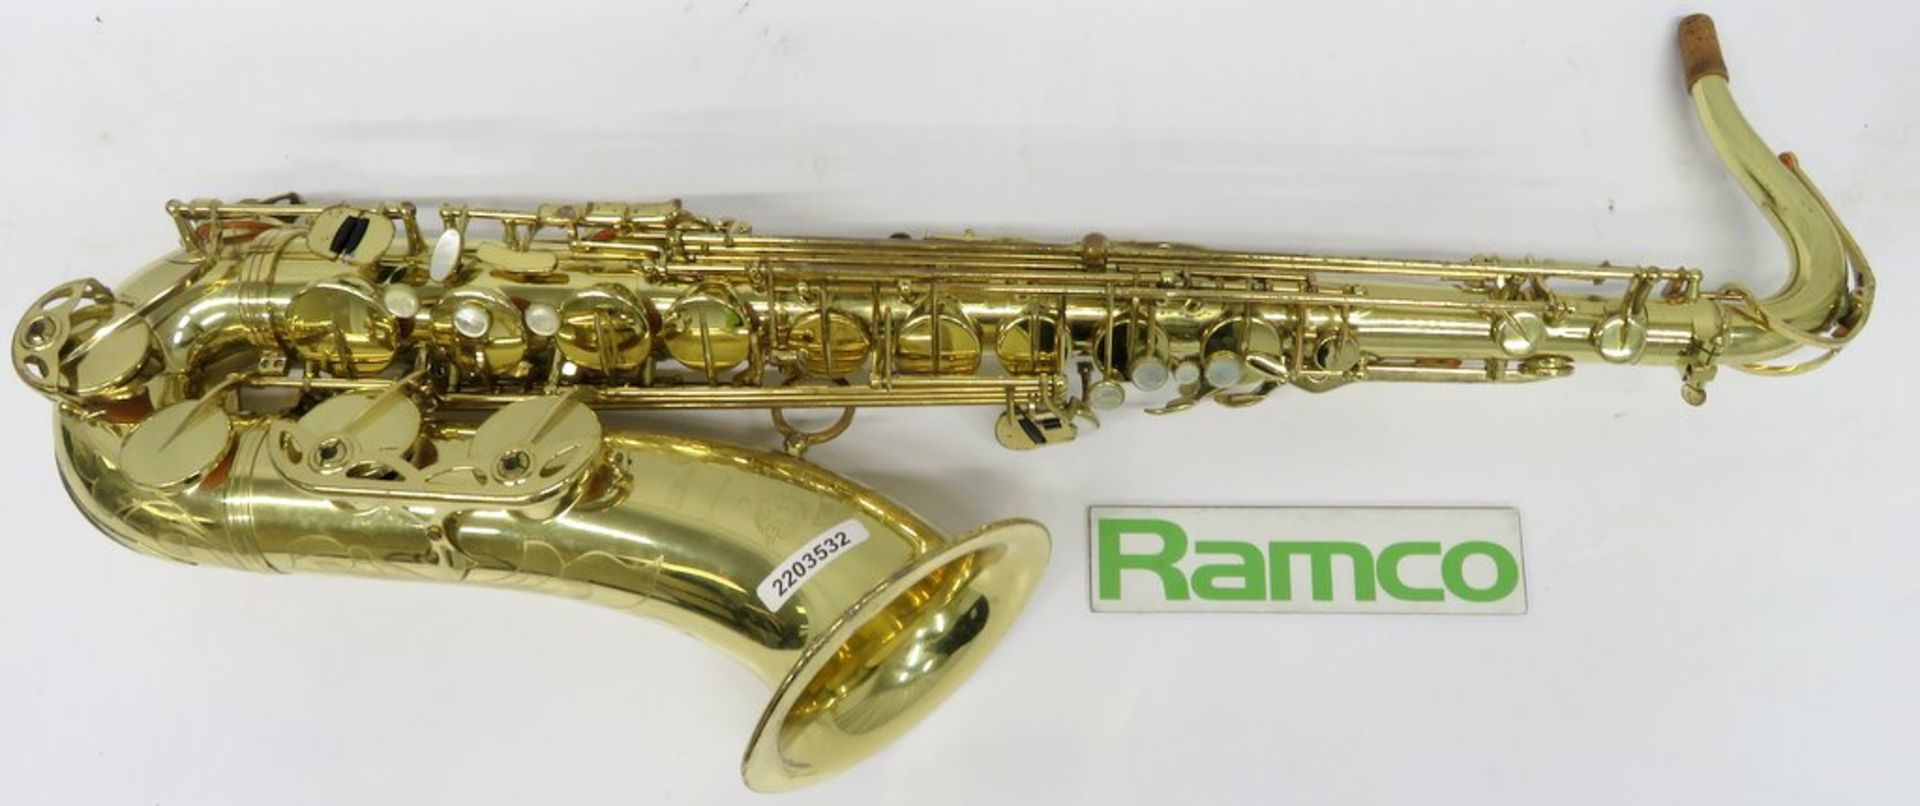 Henri Selmer Super Action 80 Serie 3 Tenor Saxophone With Case. Serial Number: N.657313. - Image 4 of 18